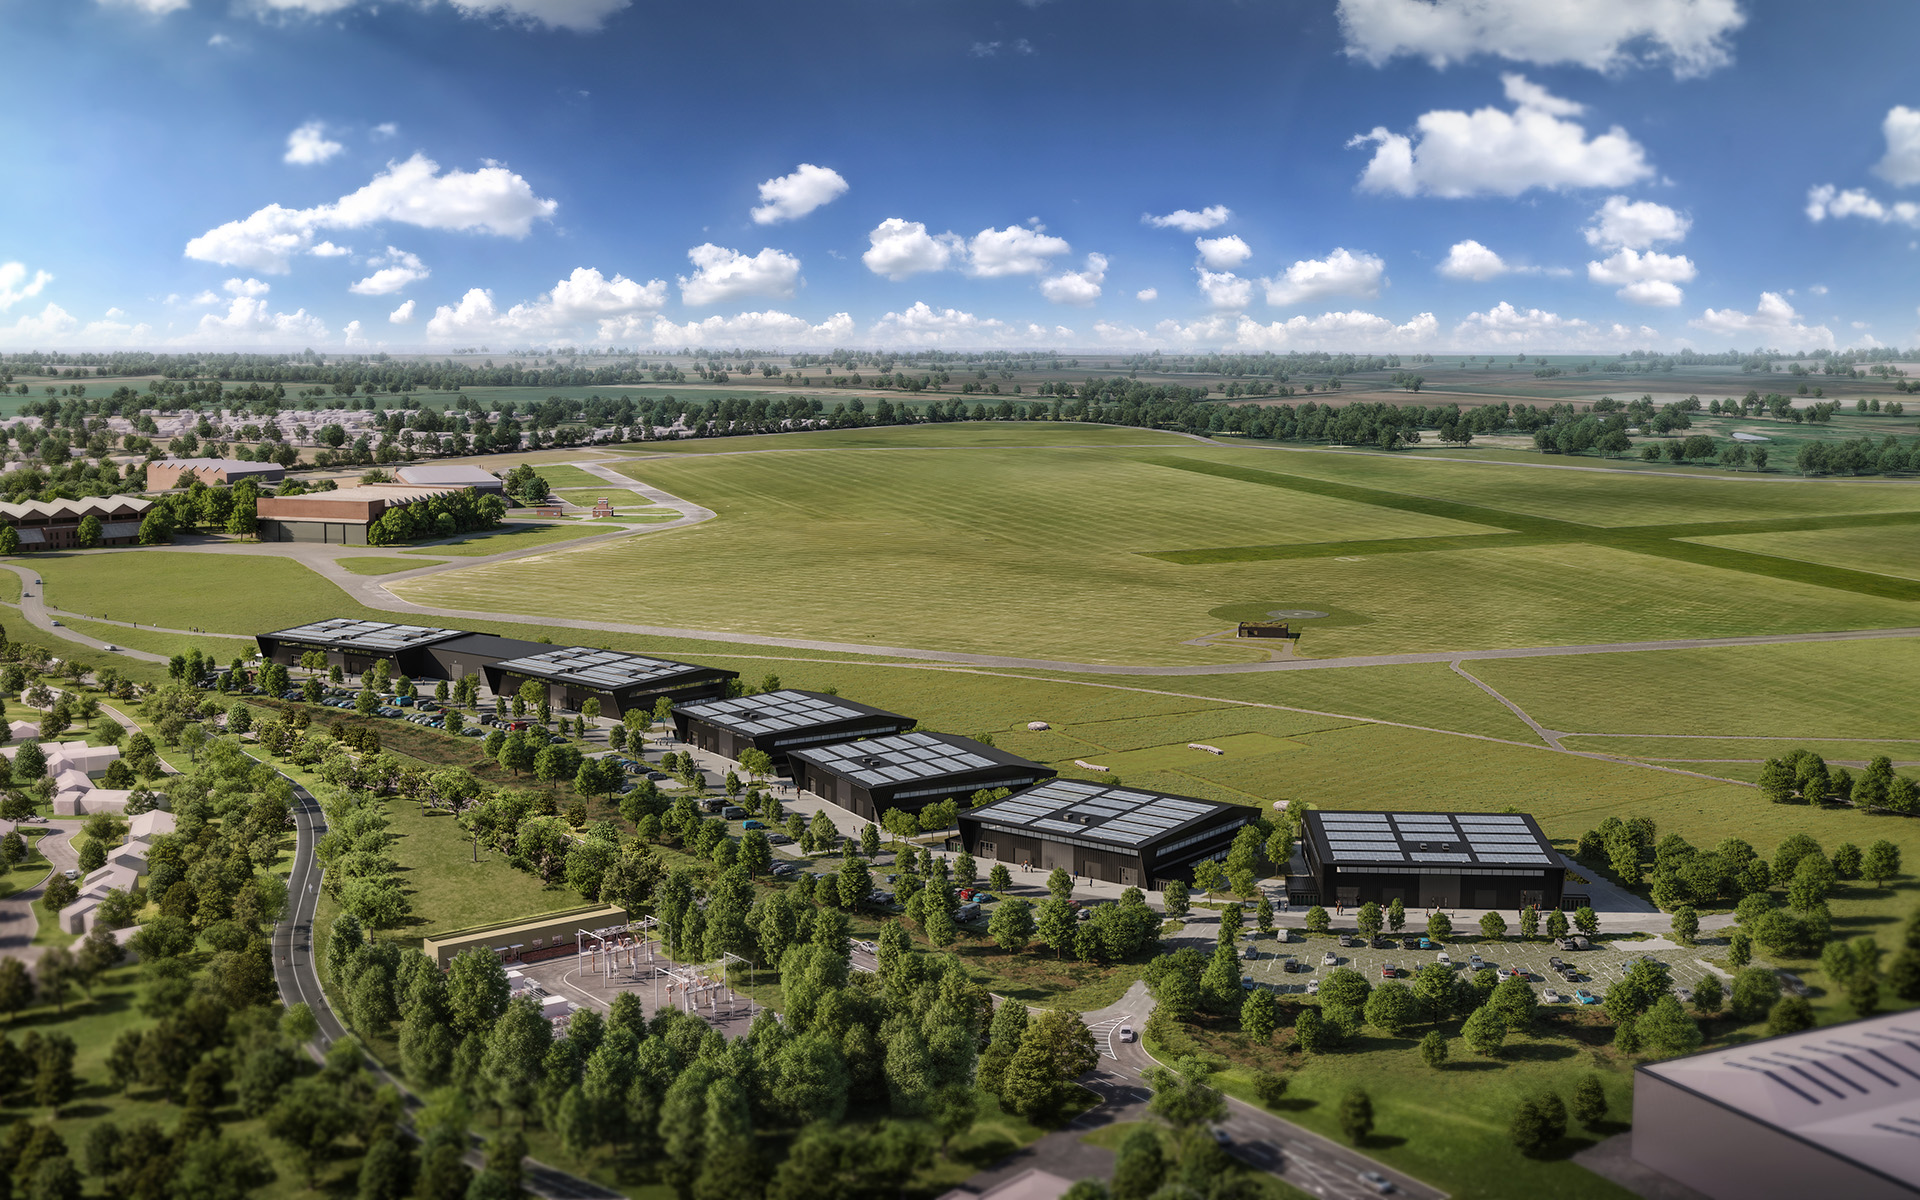 01-Bicester_Motion-SPY_Innovation_Aerial_Blurred_Final_240430_new